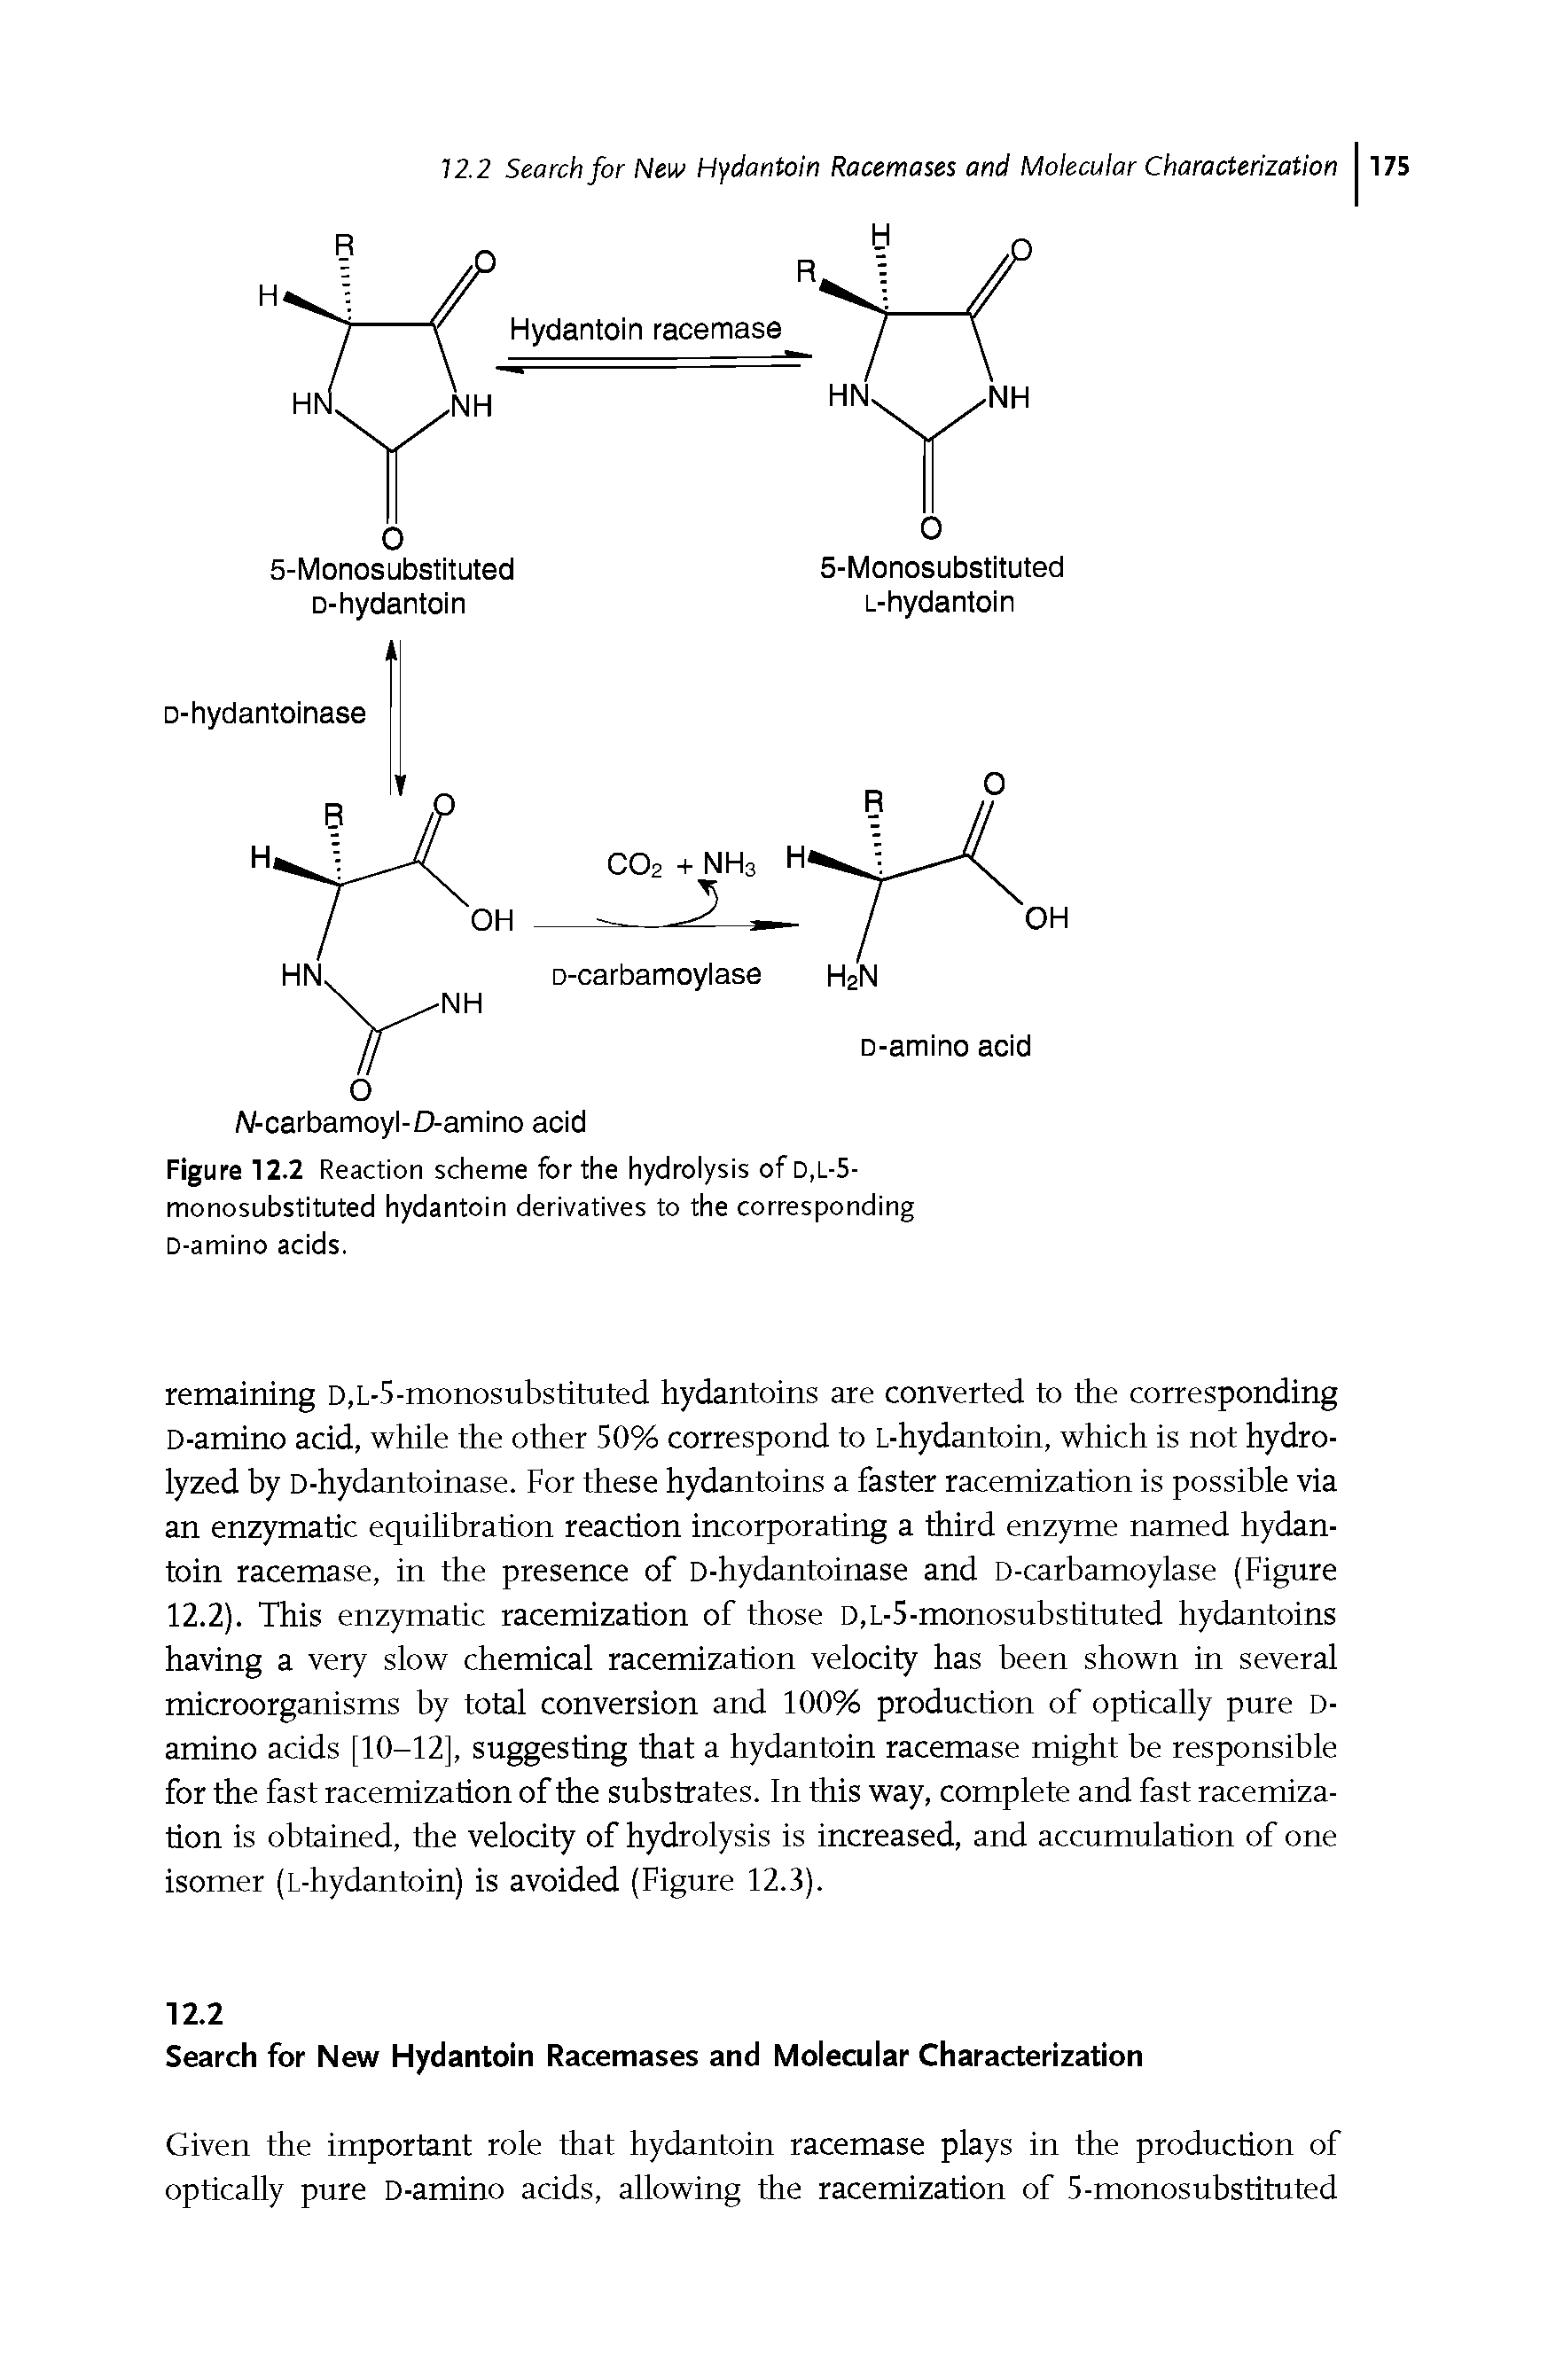 Figure 12.2 Reaction scheme for the hydrolysis of d,l-5-monosubstituted hydantoin derivatives to the corresponding D-amino acids.